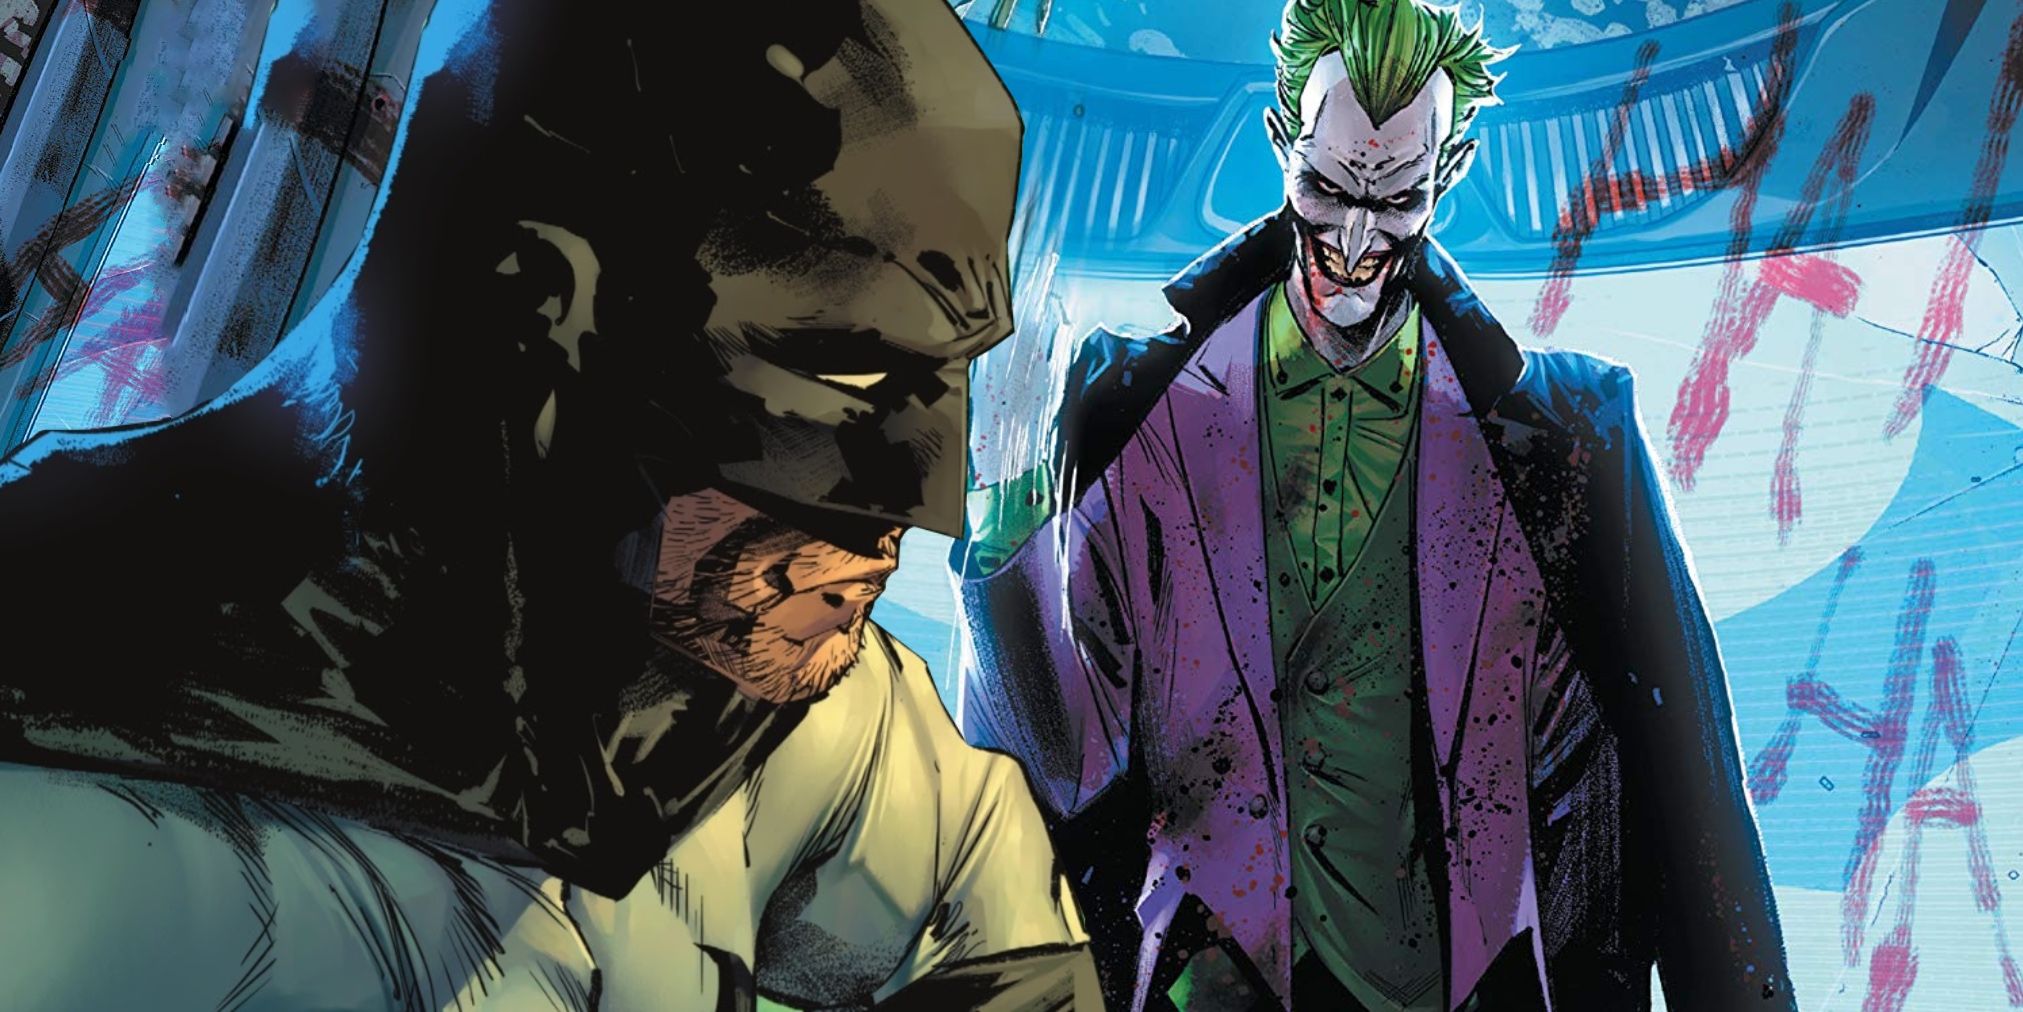 Batman Actually Succeeded in His Original Mission Before Joker Arrived